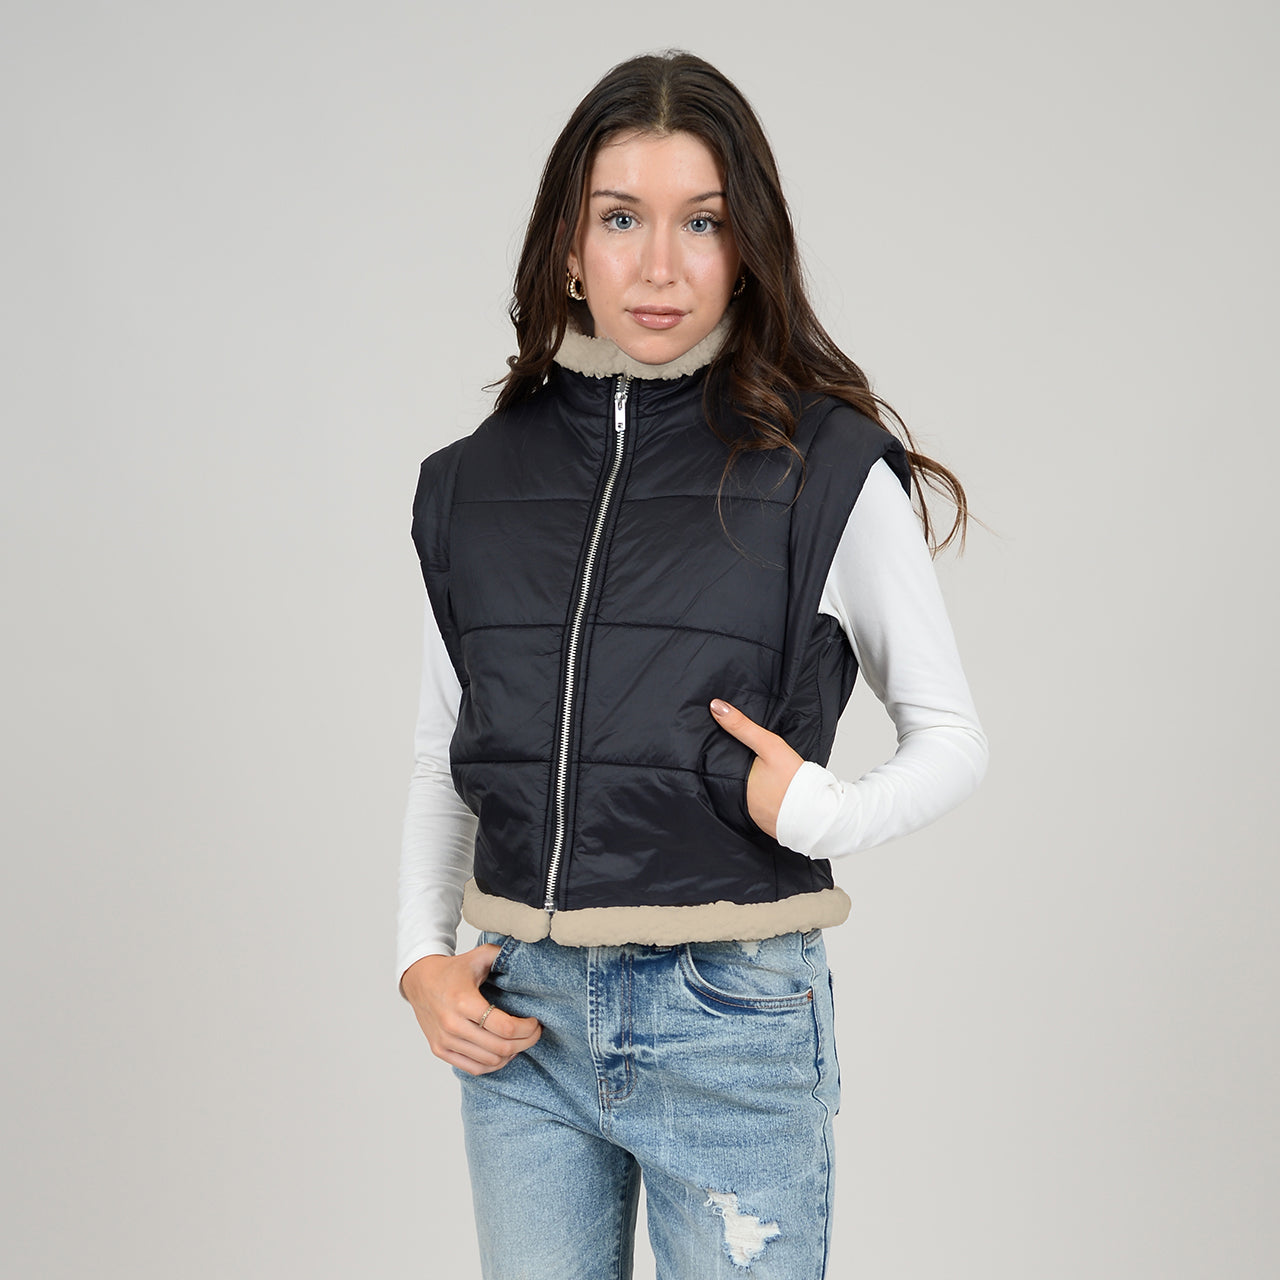 Puffer style vest with zip up closure black.